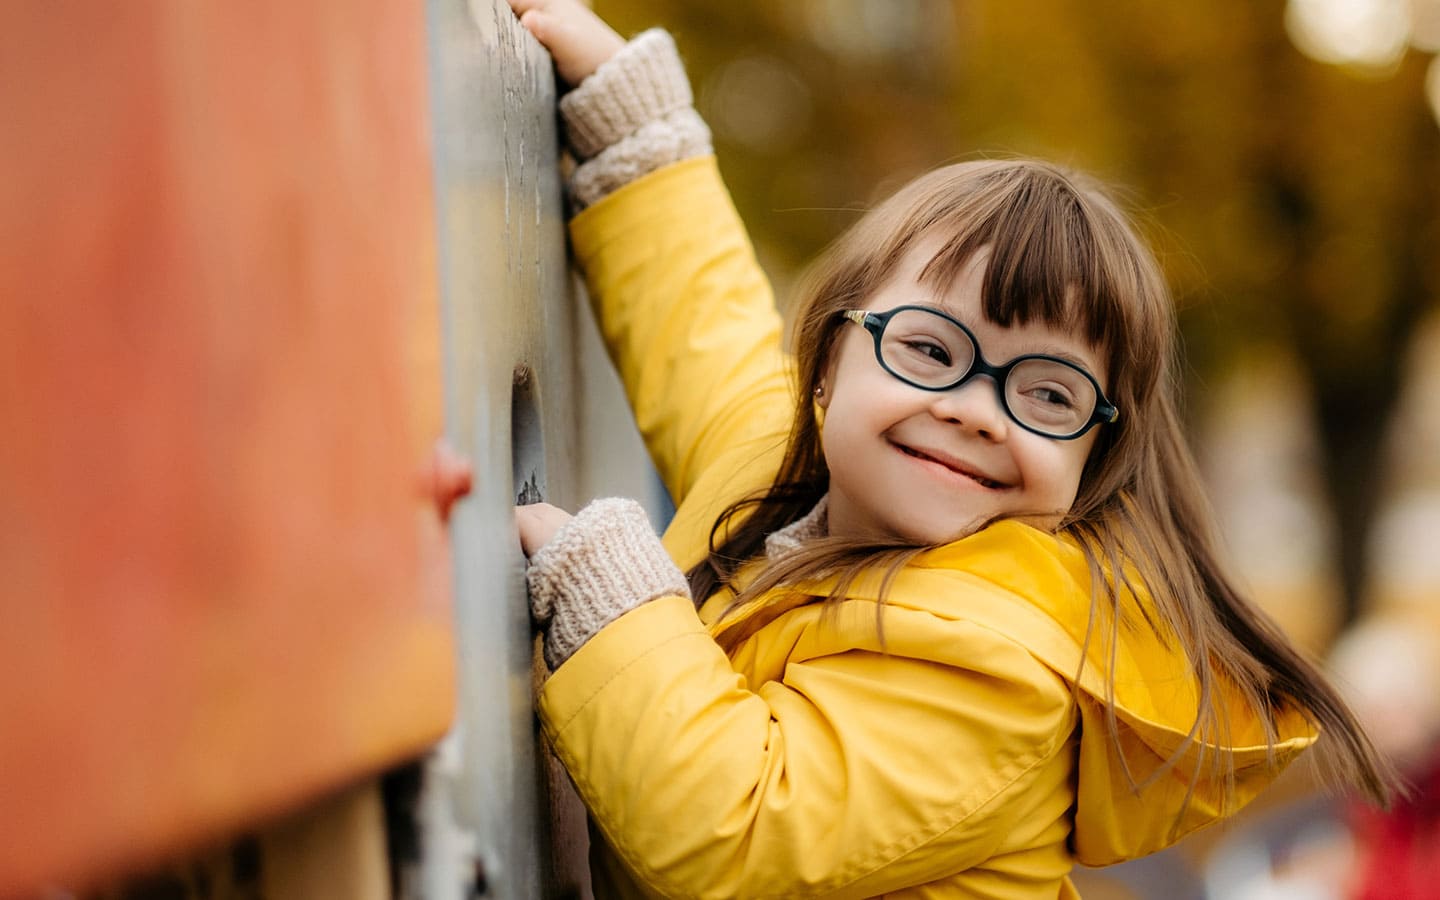 Girl with glasses, smiling